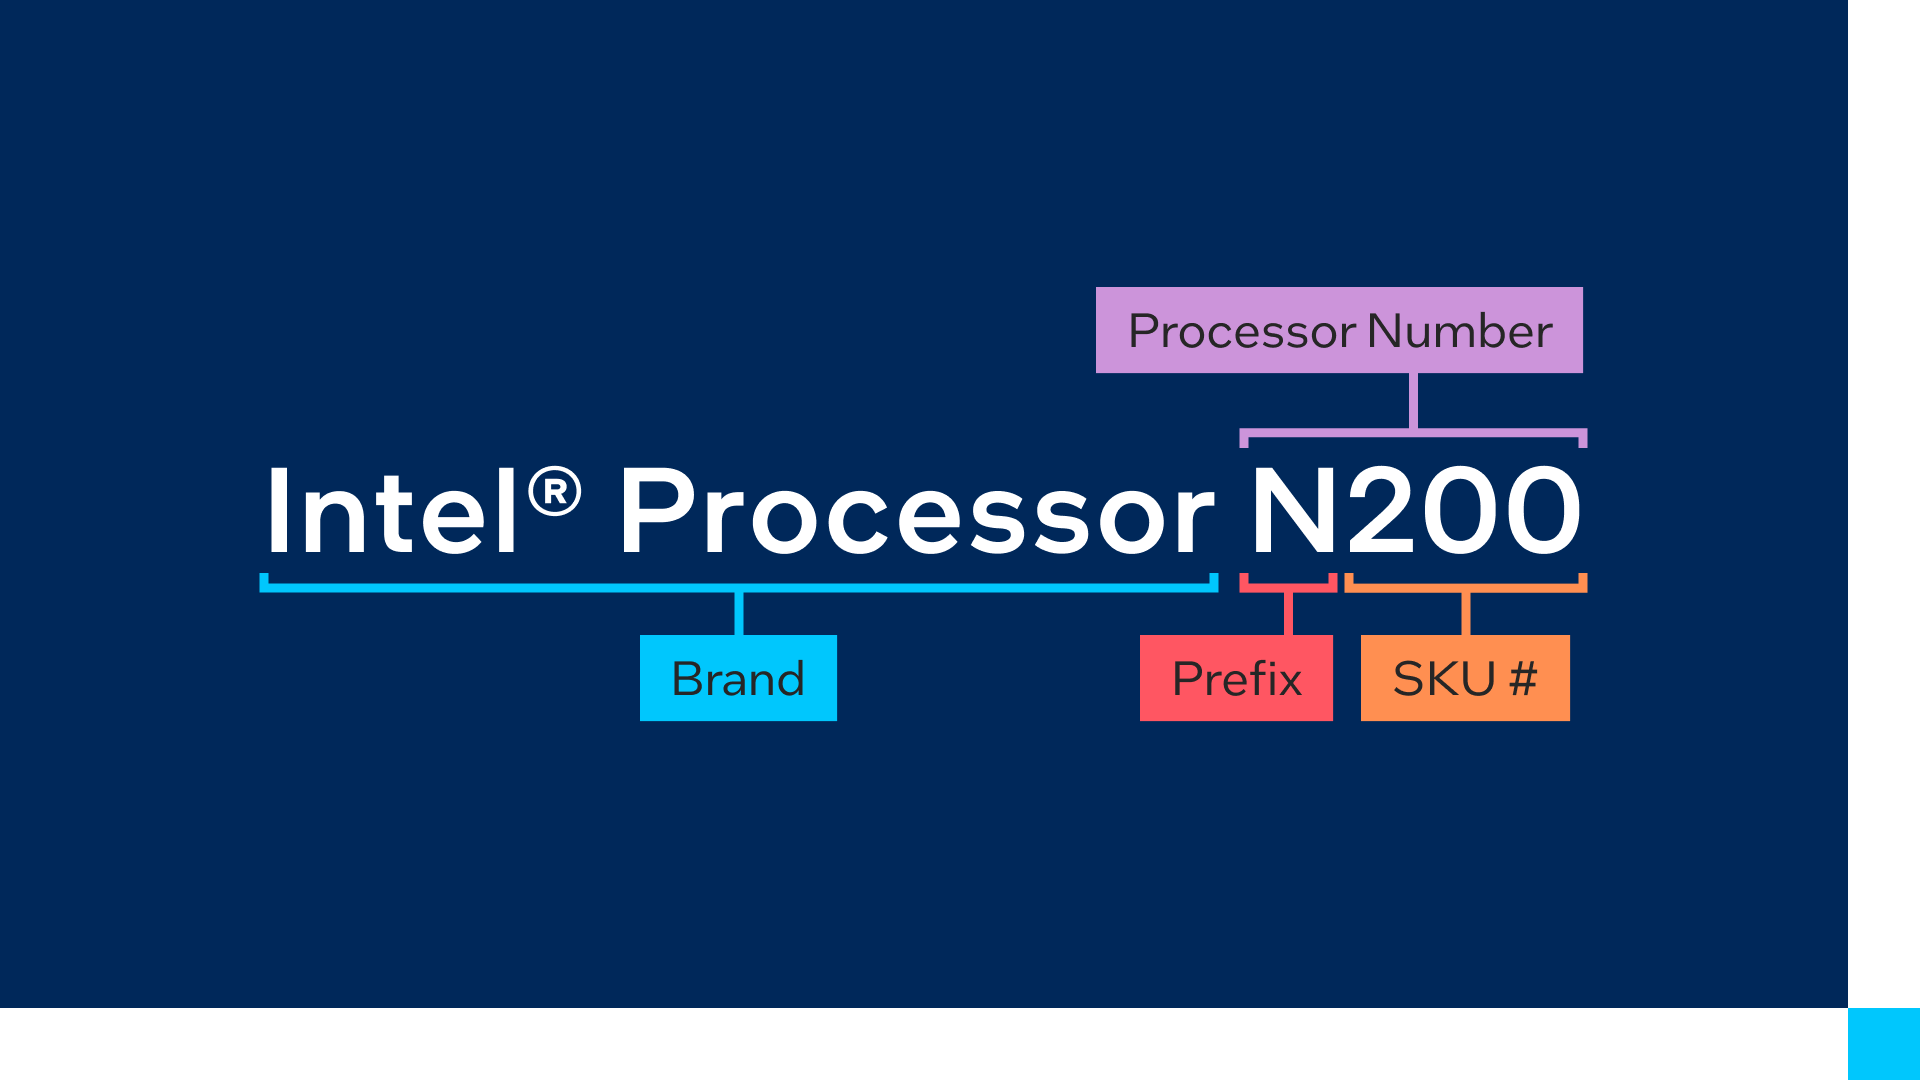 intel processor naming scheme details in a picture